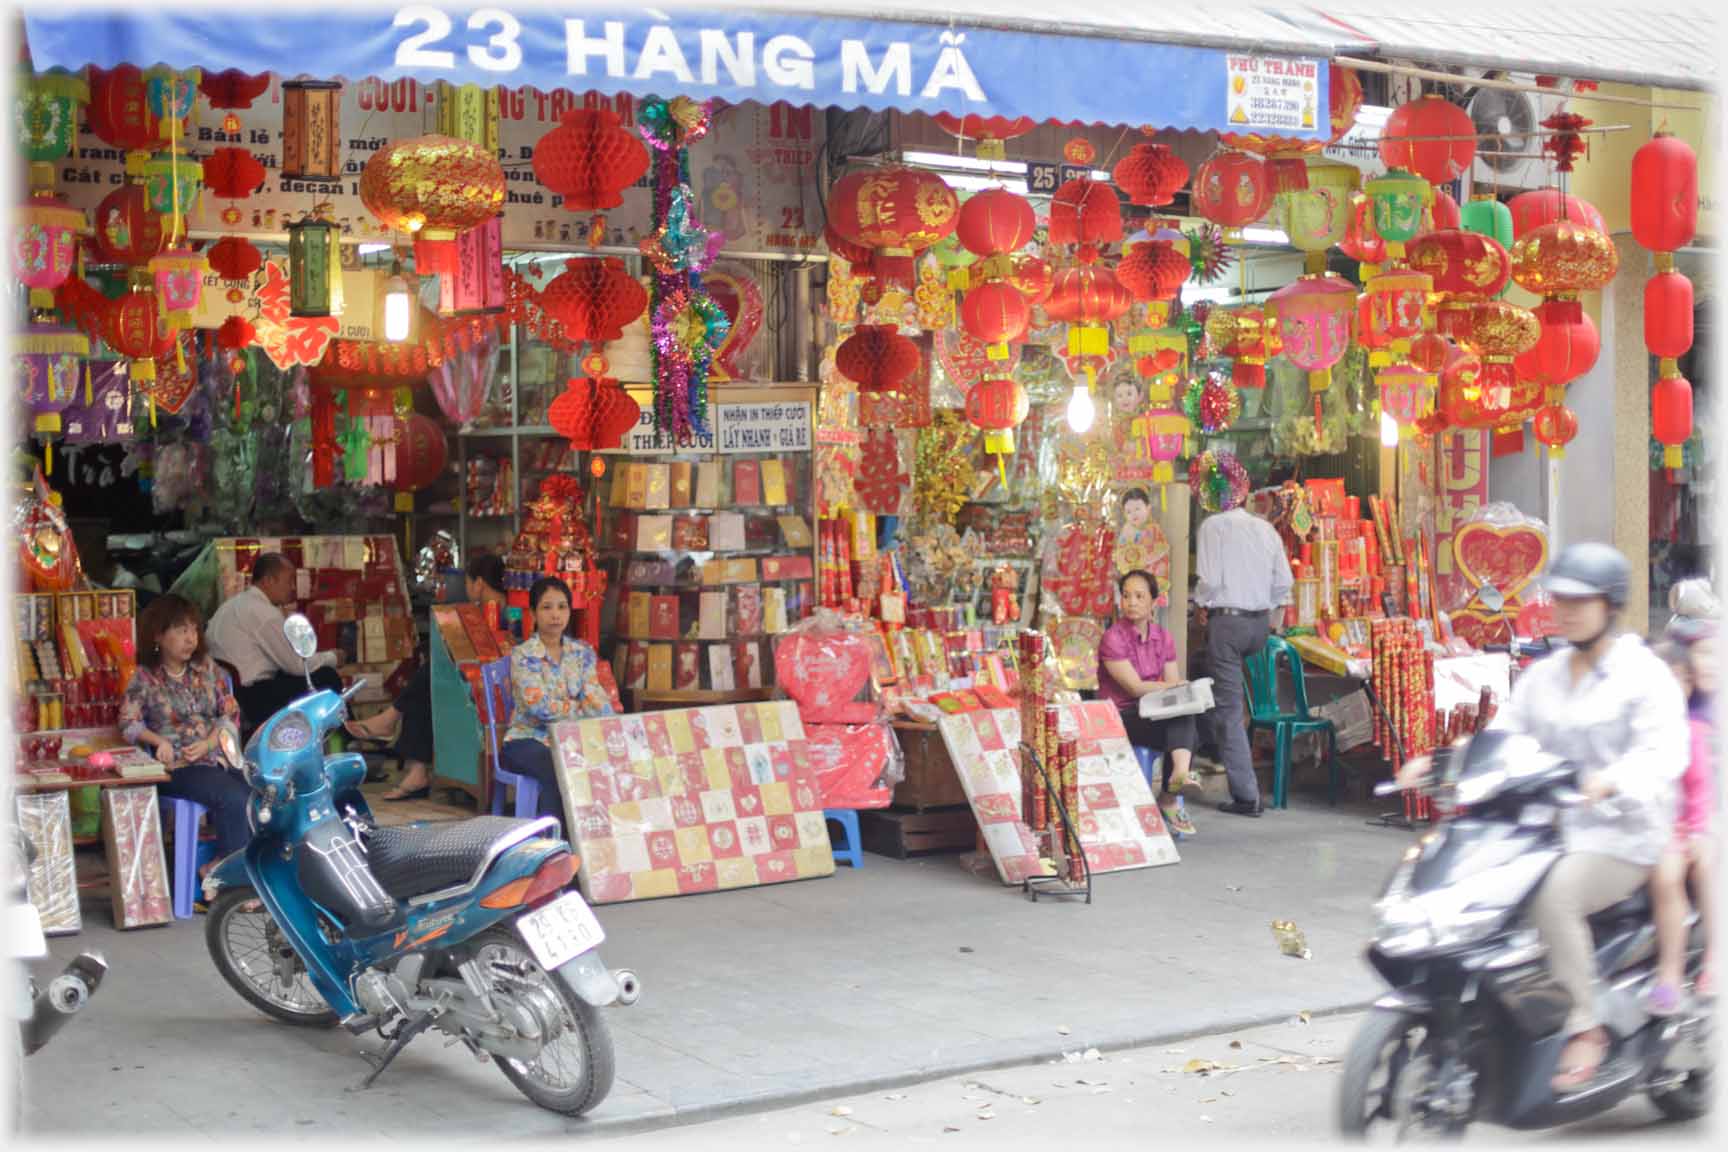 Street view of shop selling decorations.